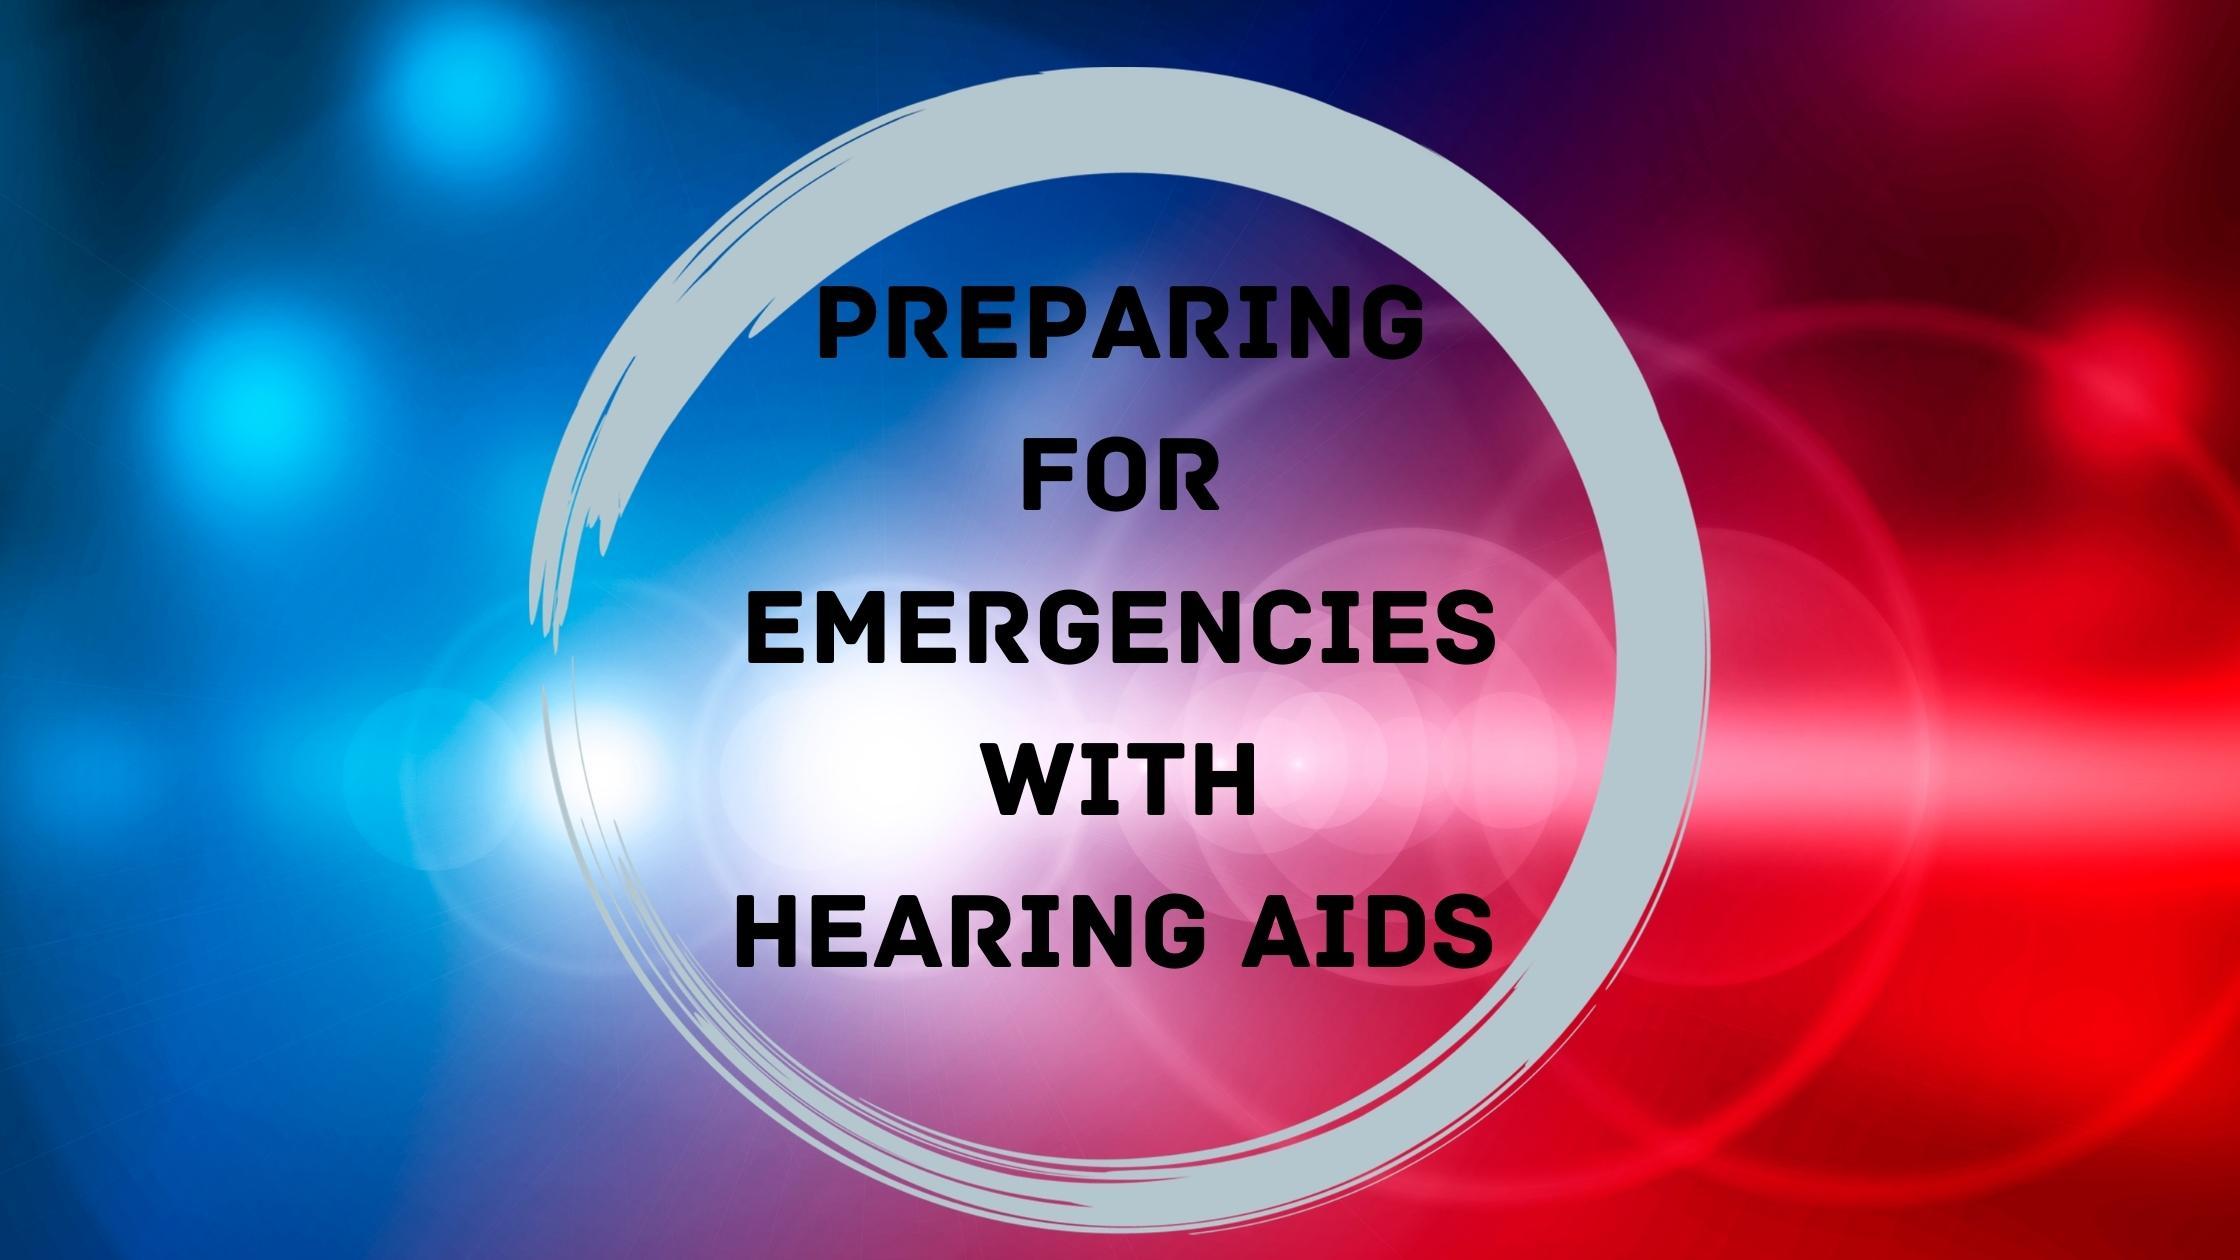 Preparing for Emergencies with Hearing Aids